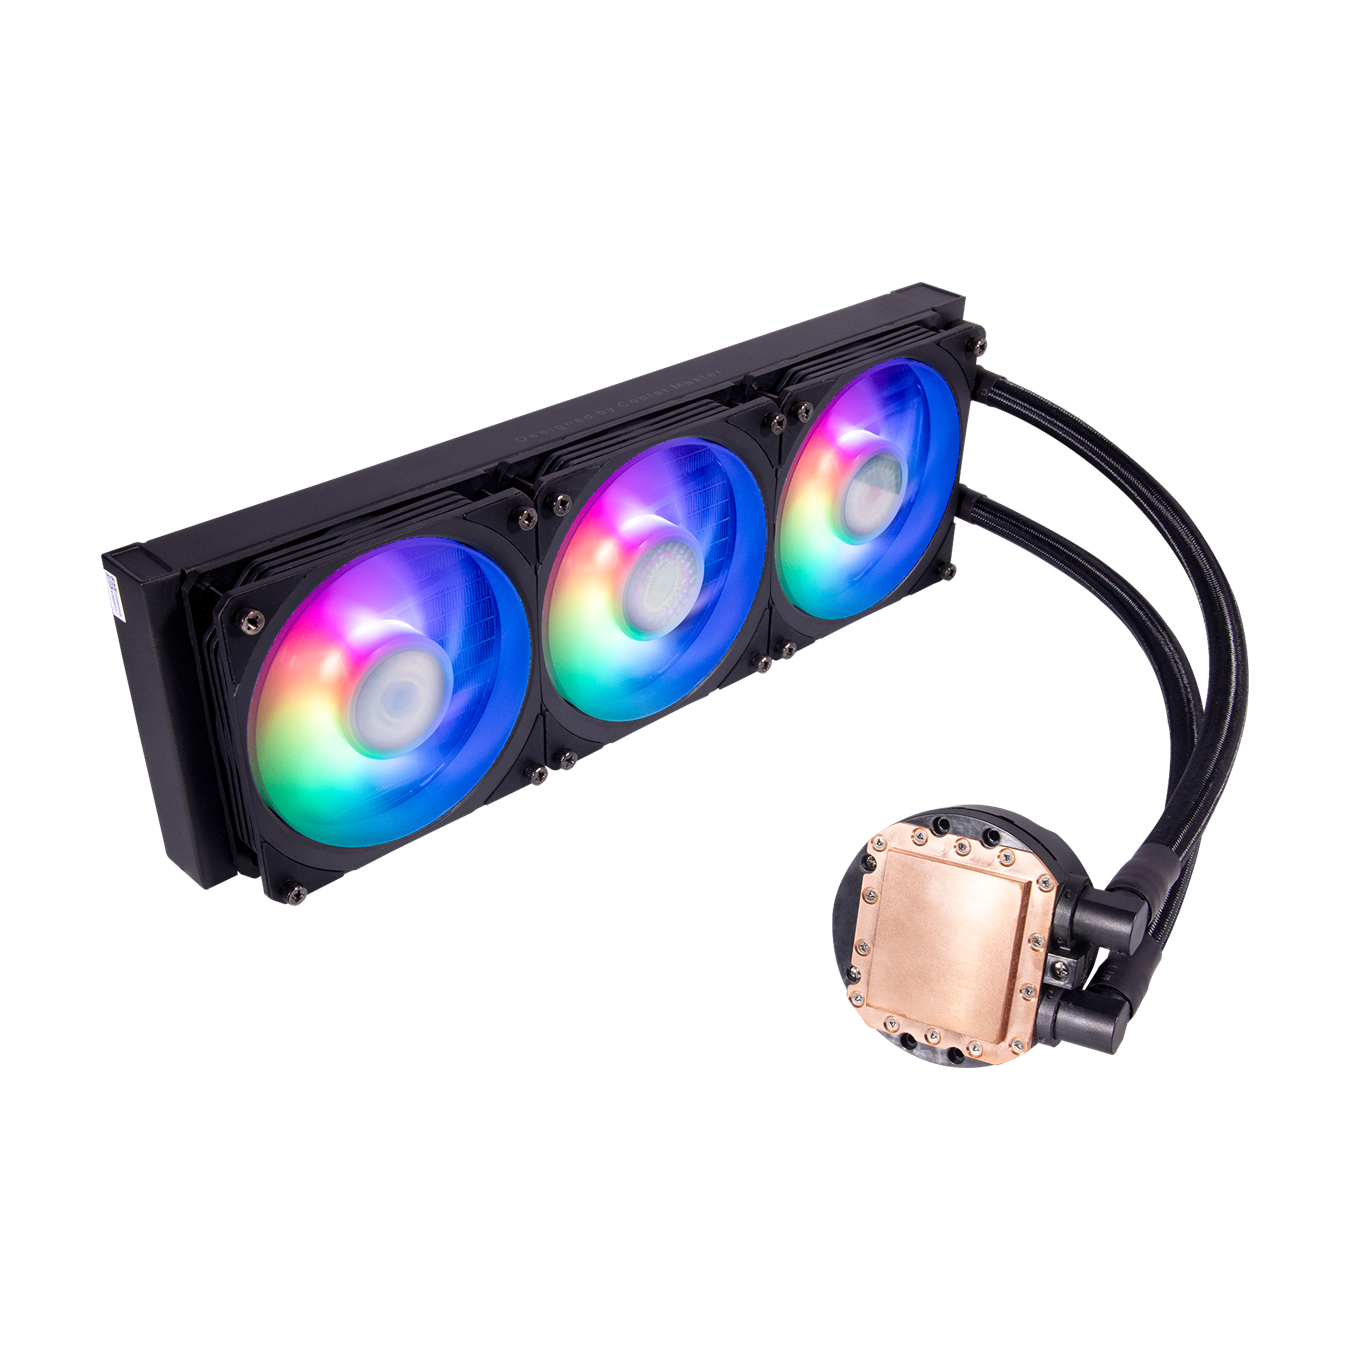 MasterLiquid PL360 Flux - Addressable Gen 2 RGB ready for independent implemented customization